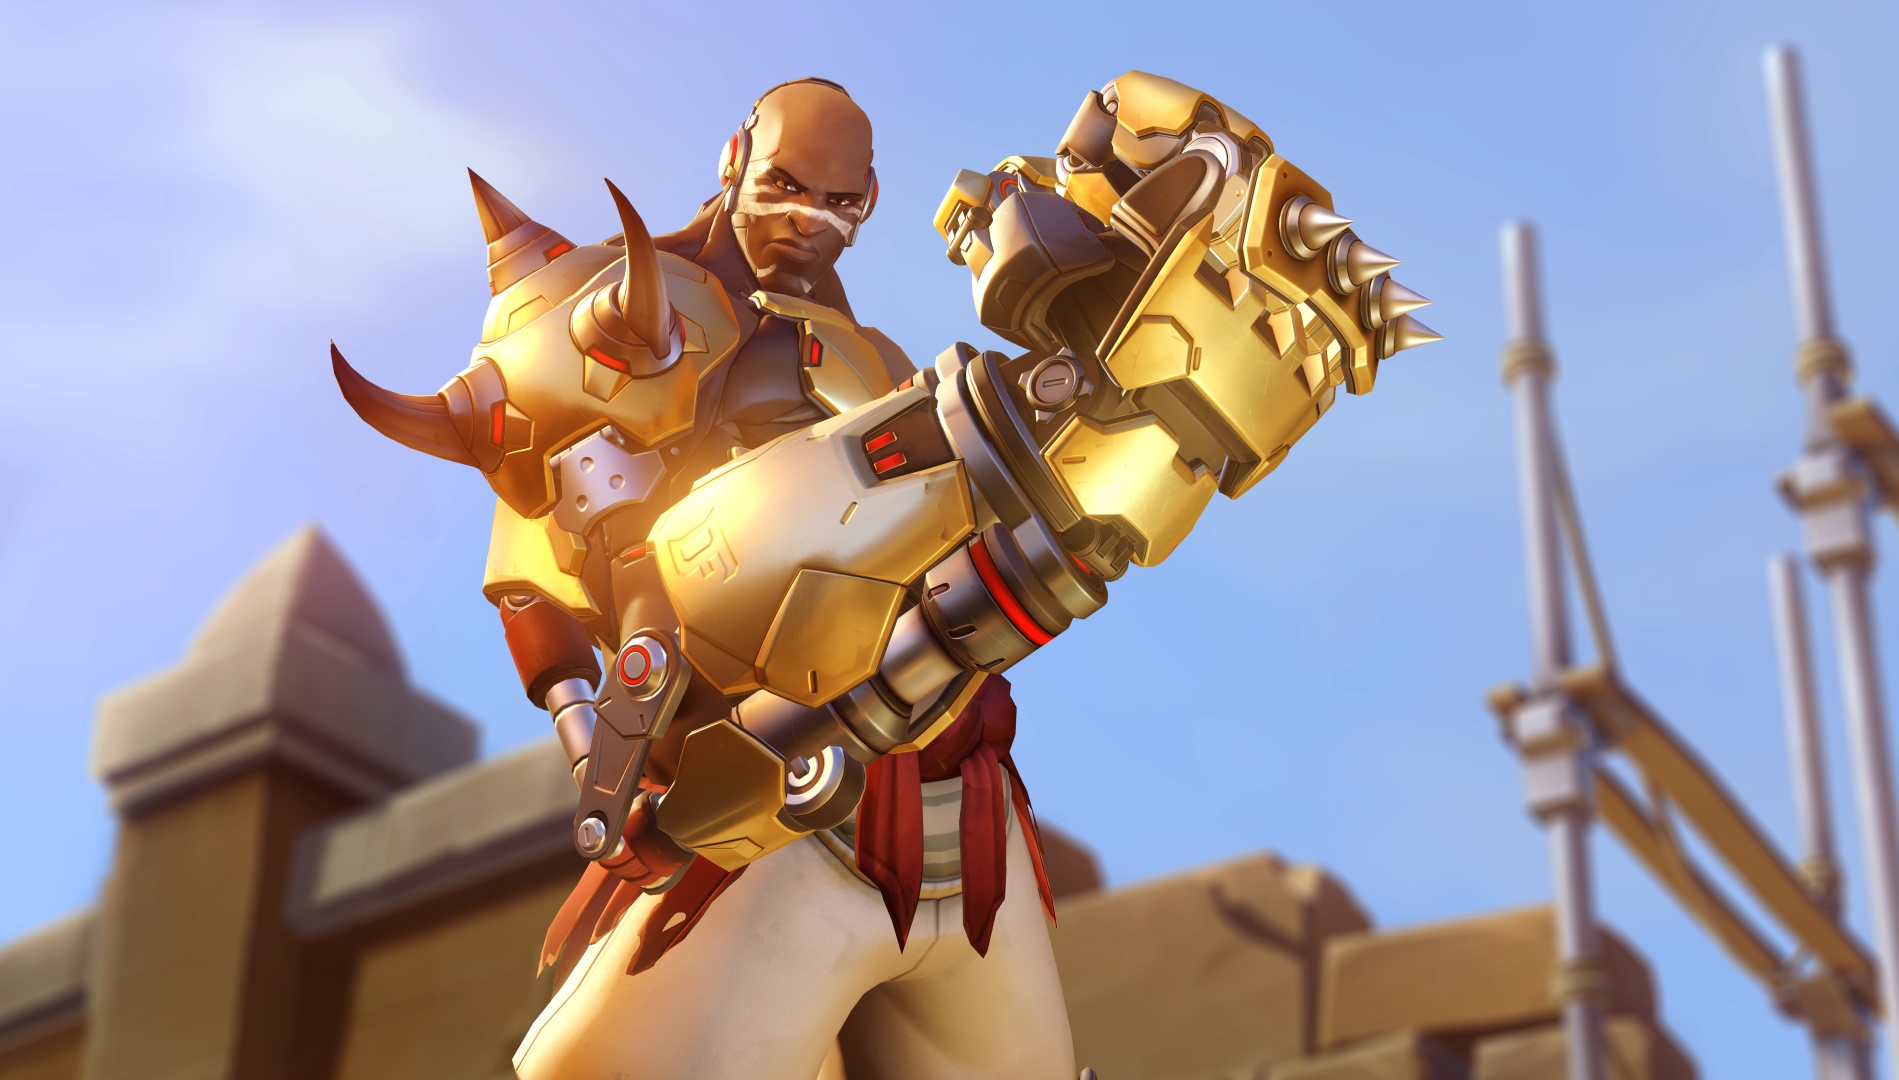 PTR-Patch-Notes-Doomfist-nerfs-McCree-buffs-and-more-July-13th-2017-Overwatch